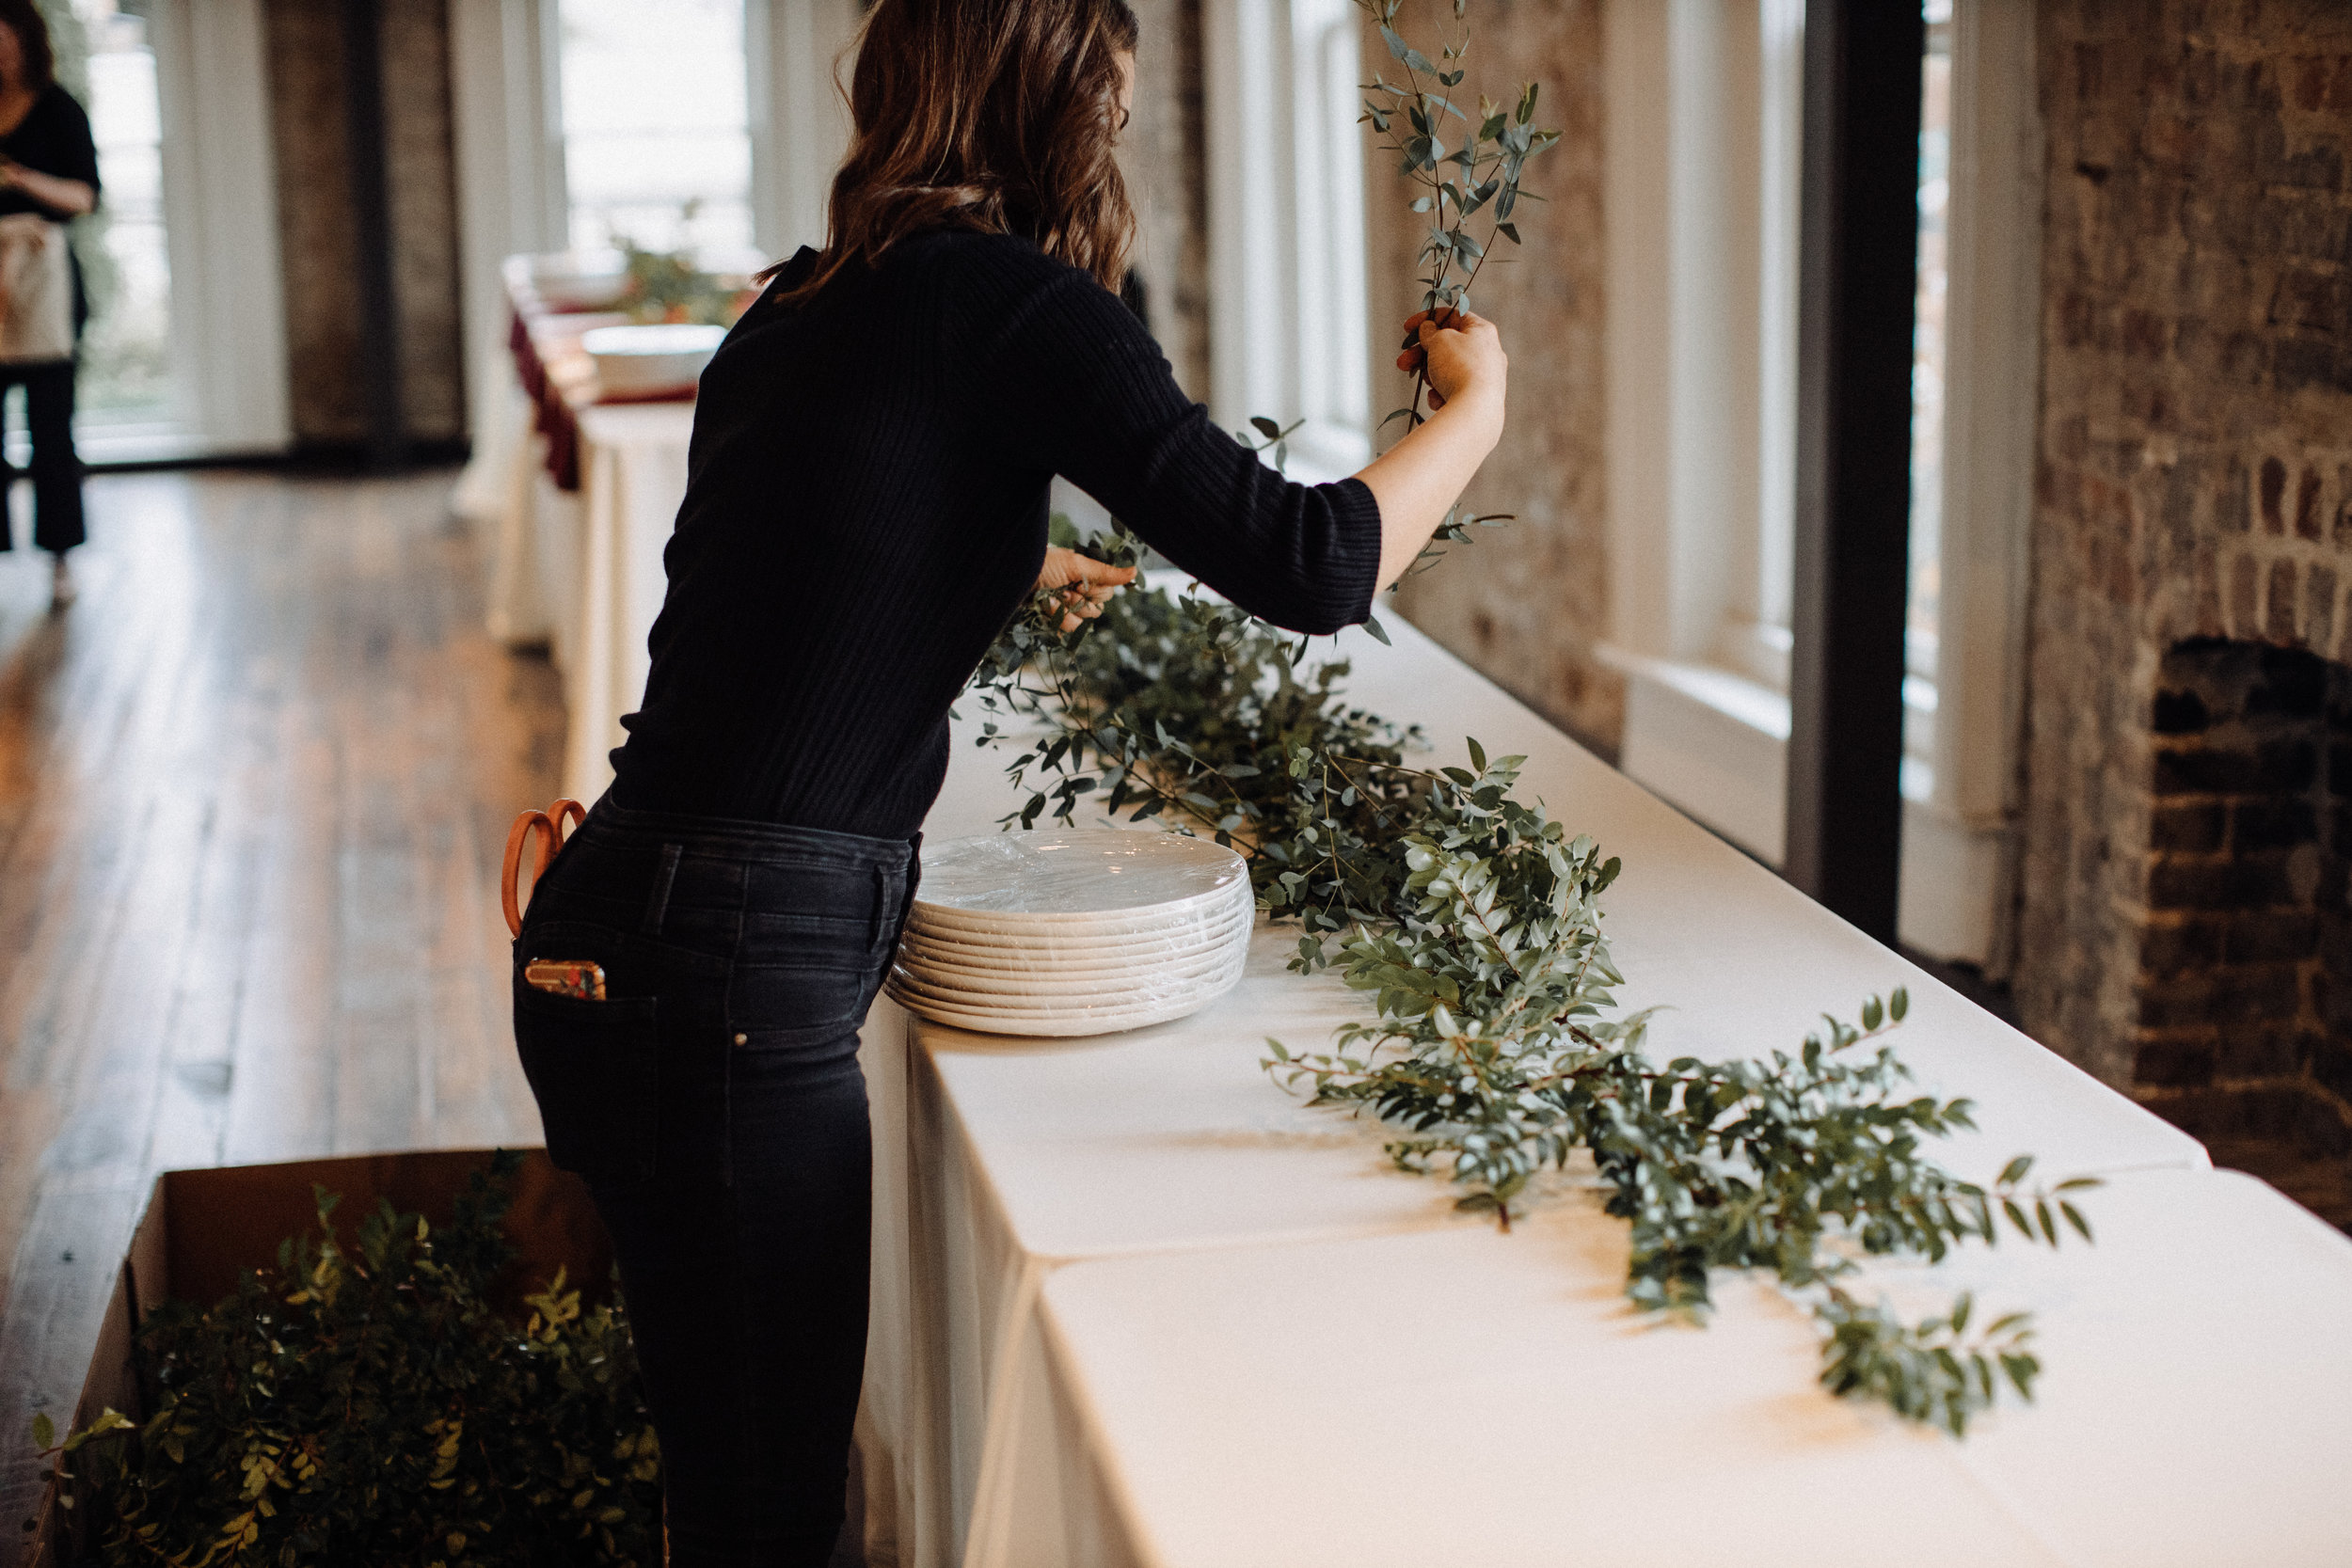 Garland table runner of eucalyptus and natural greenery. Garden-inspired wedding florals at the Cordelle, Nashville.